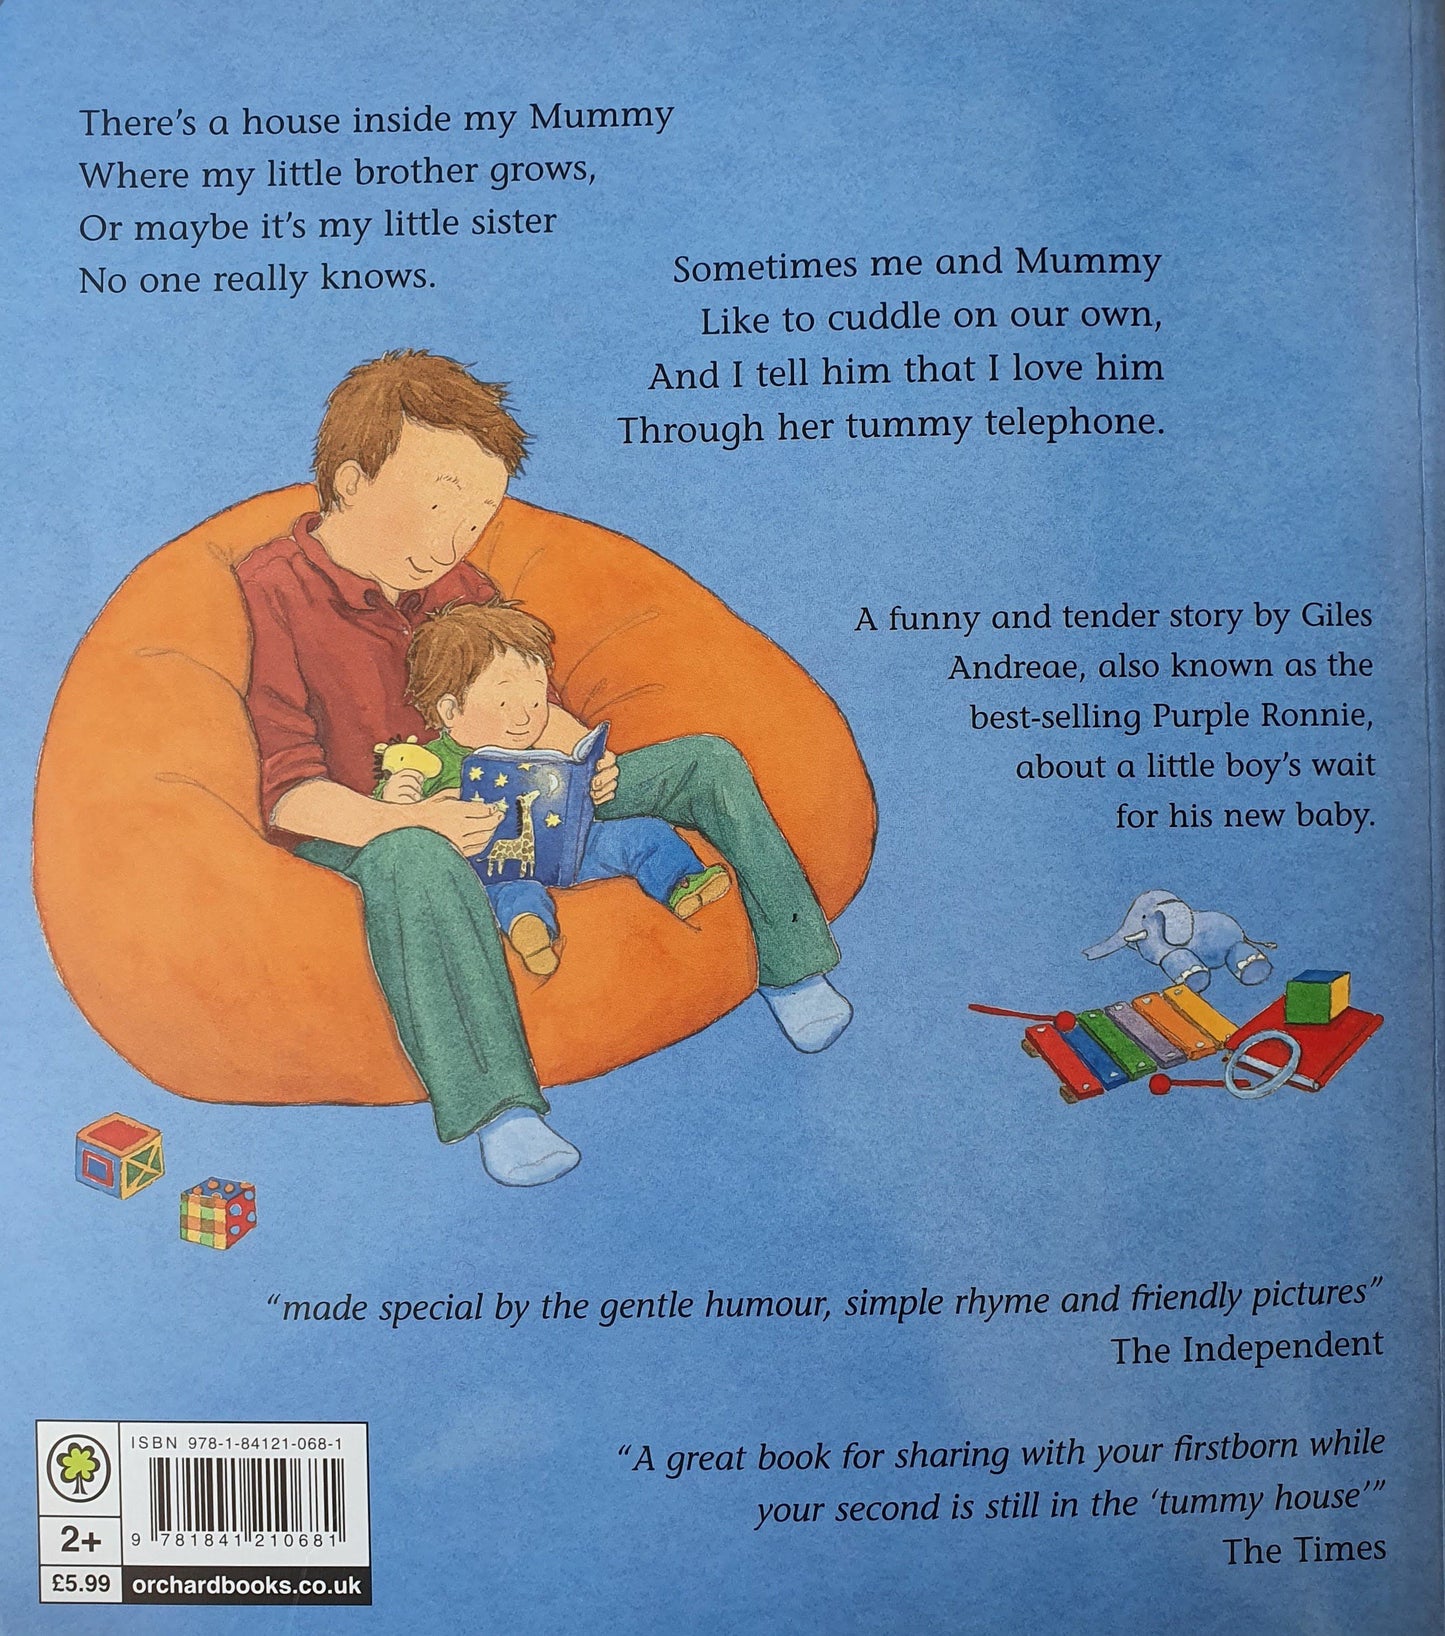 There's A house inside my mummy Like New, 0+ Yrs Usborne  (6685636067513)